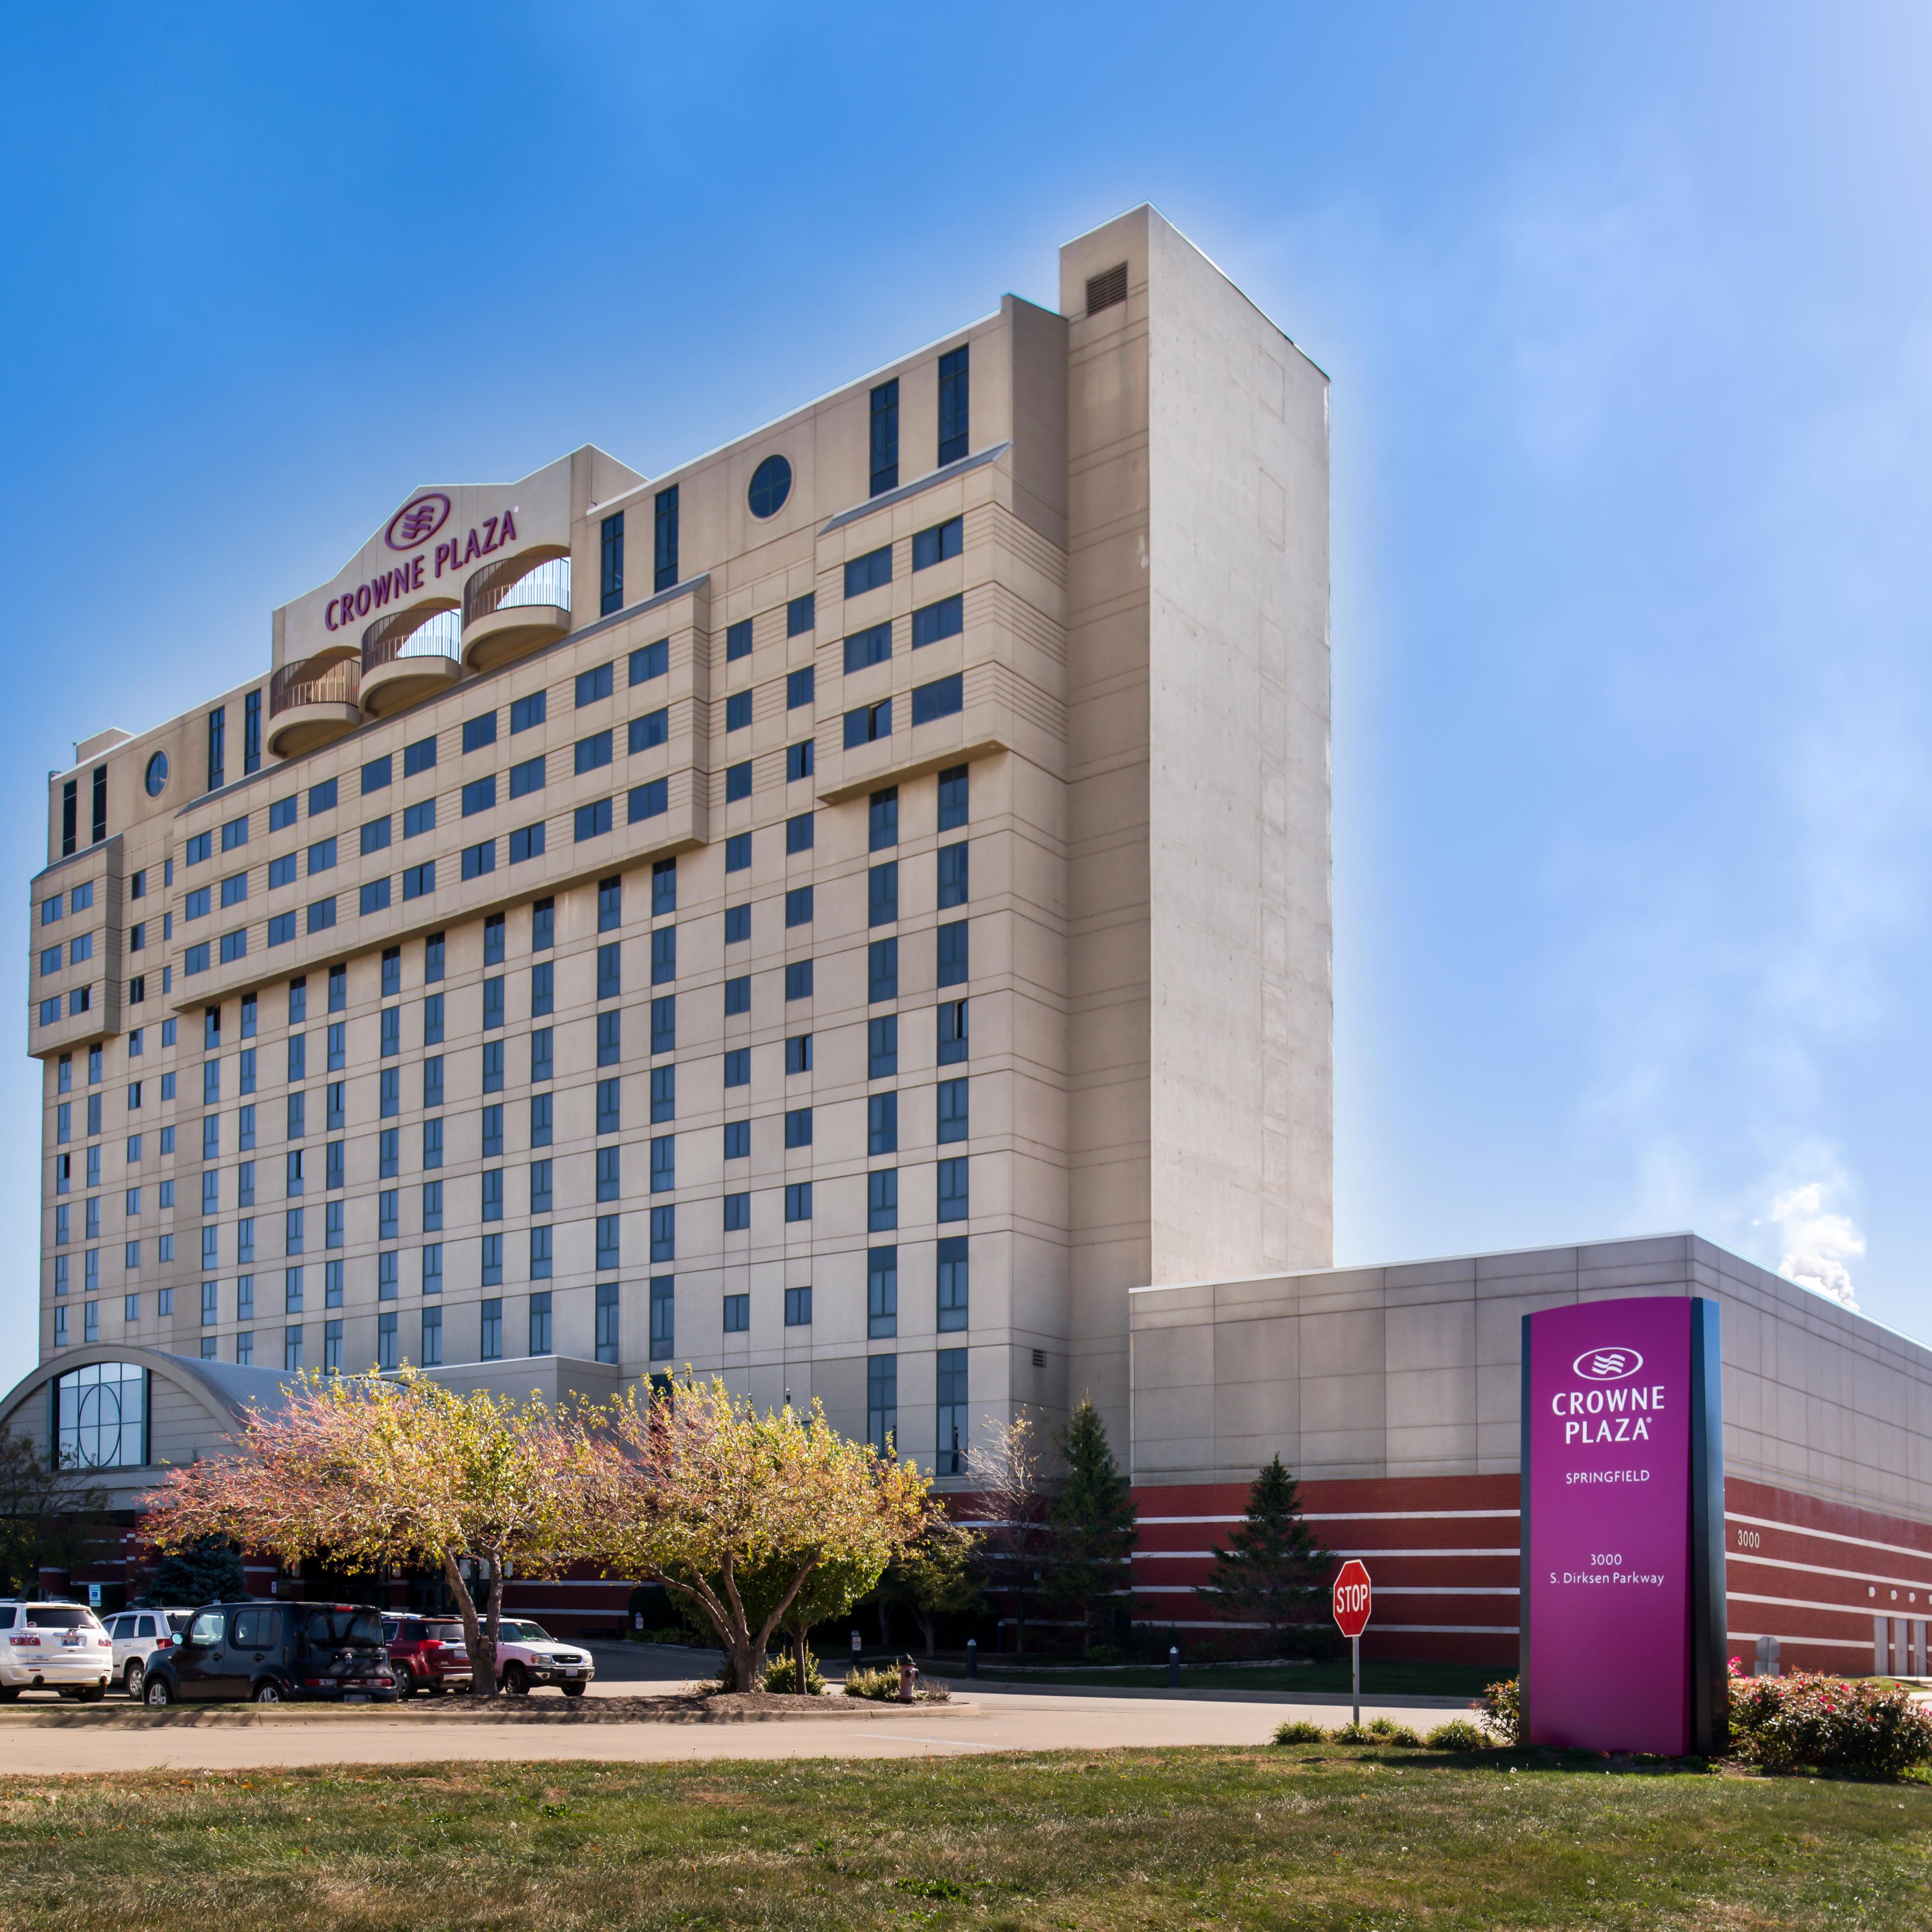 Crowne Plaza is conveniently located off Interstate 55 &amp; 72